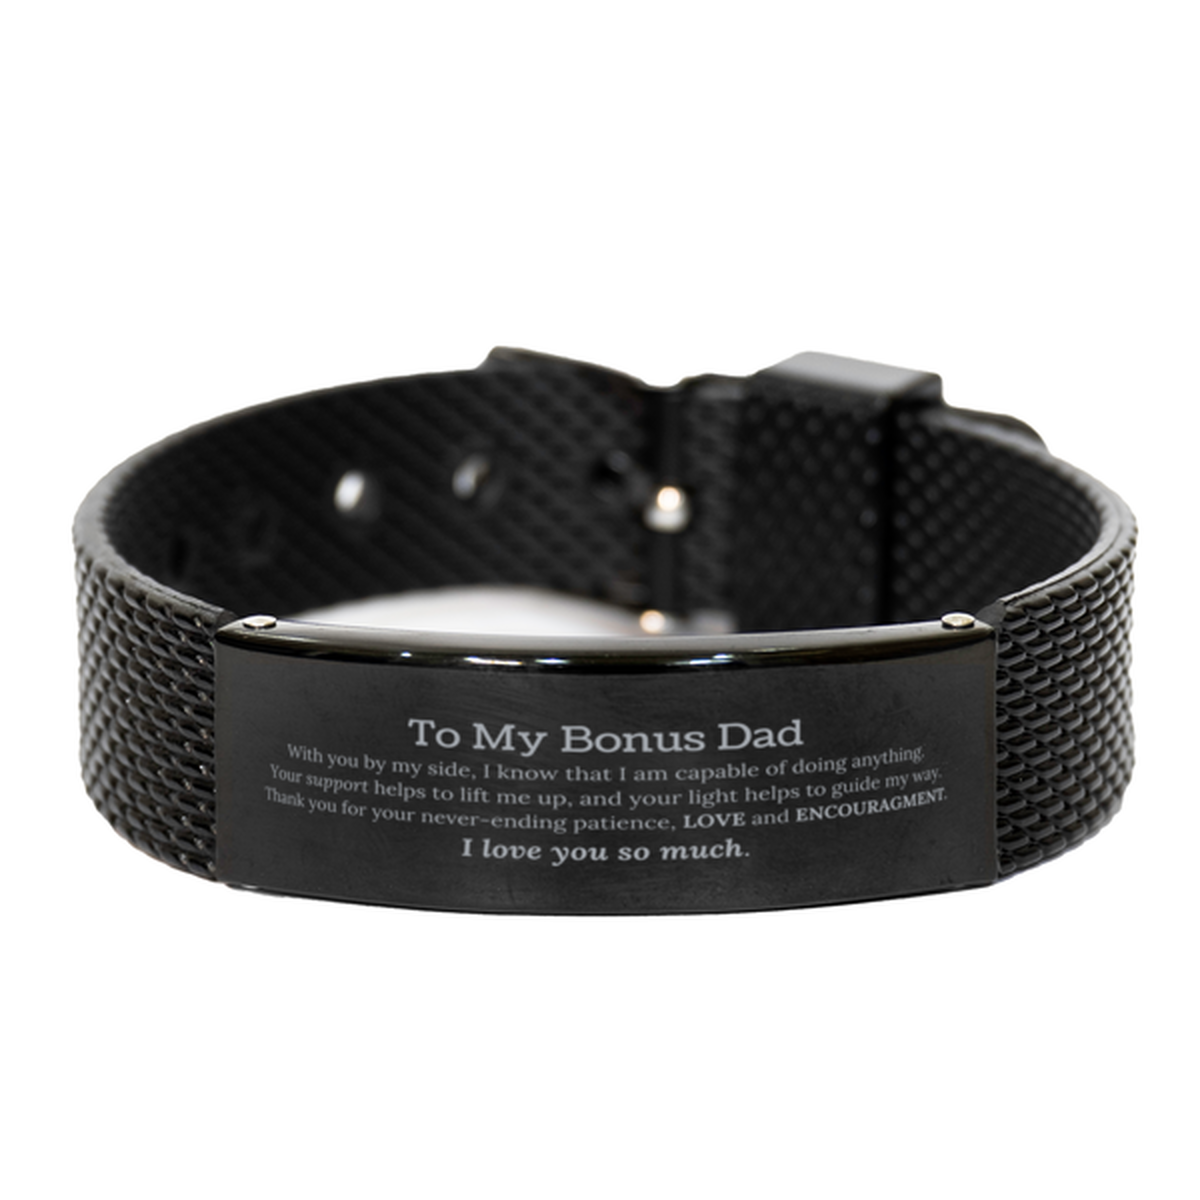 Appreciation Bonus Dad Black Shark Mesh Bracelet Gifts, To My Bonus Dad Birthday Christmas Wedding Keepsake Gifts for Bonus Dad With you by my side, I know that I am capable of doing anything. I love you so much